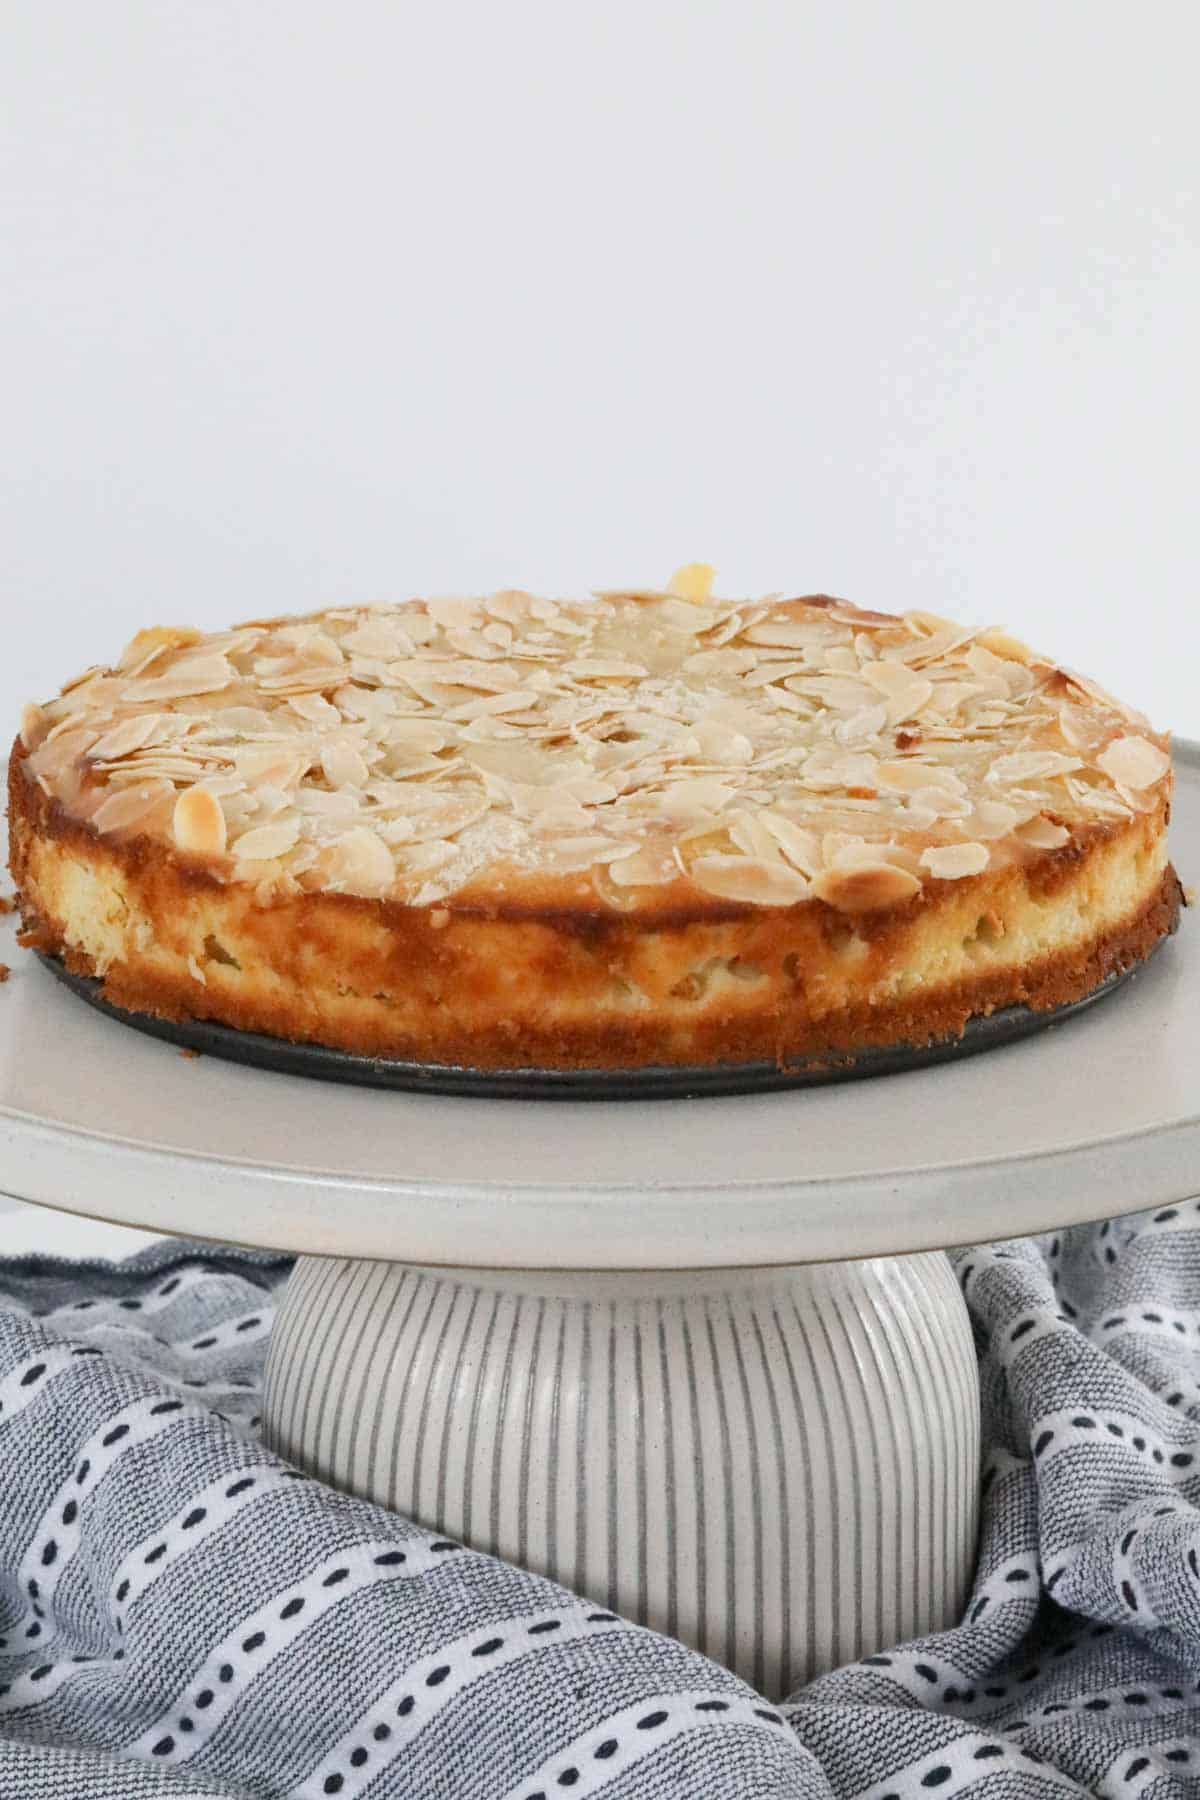 A cake topped with flaked almonds.